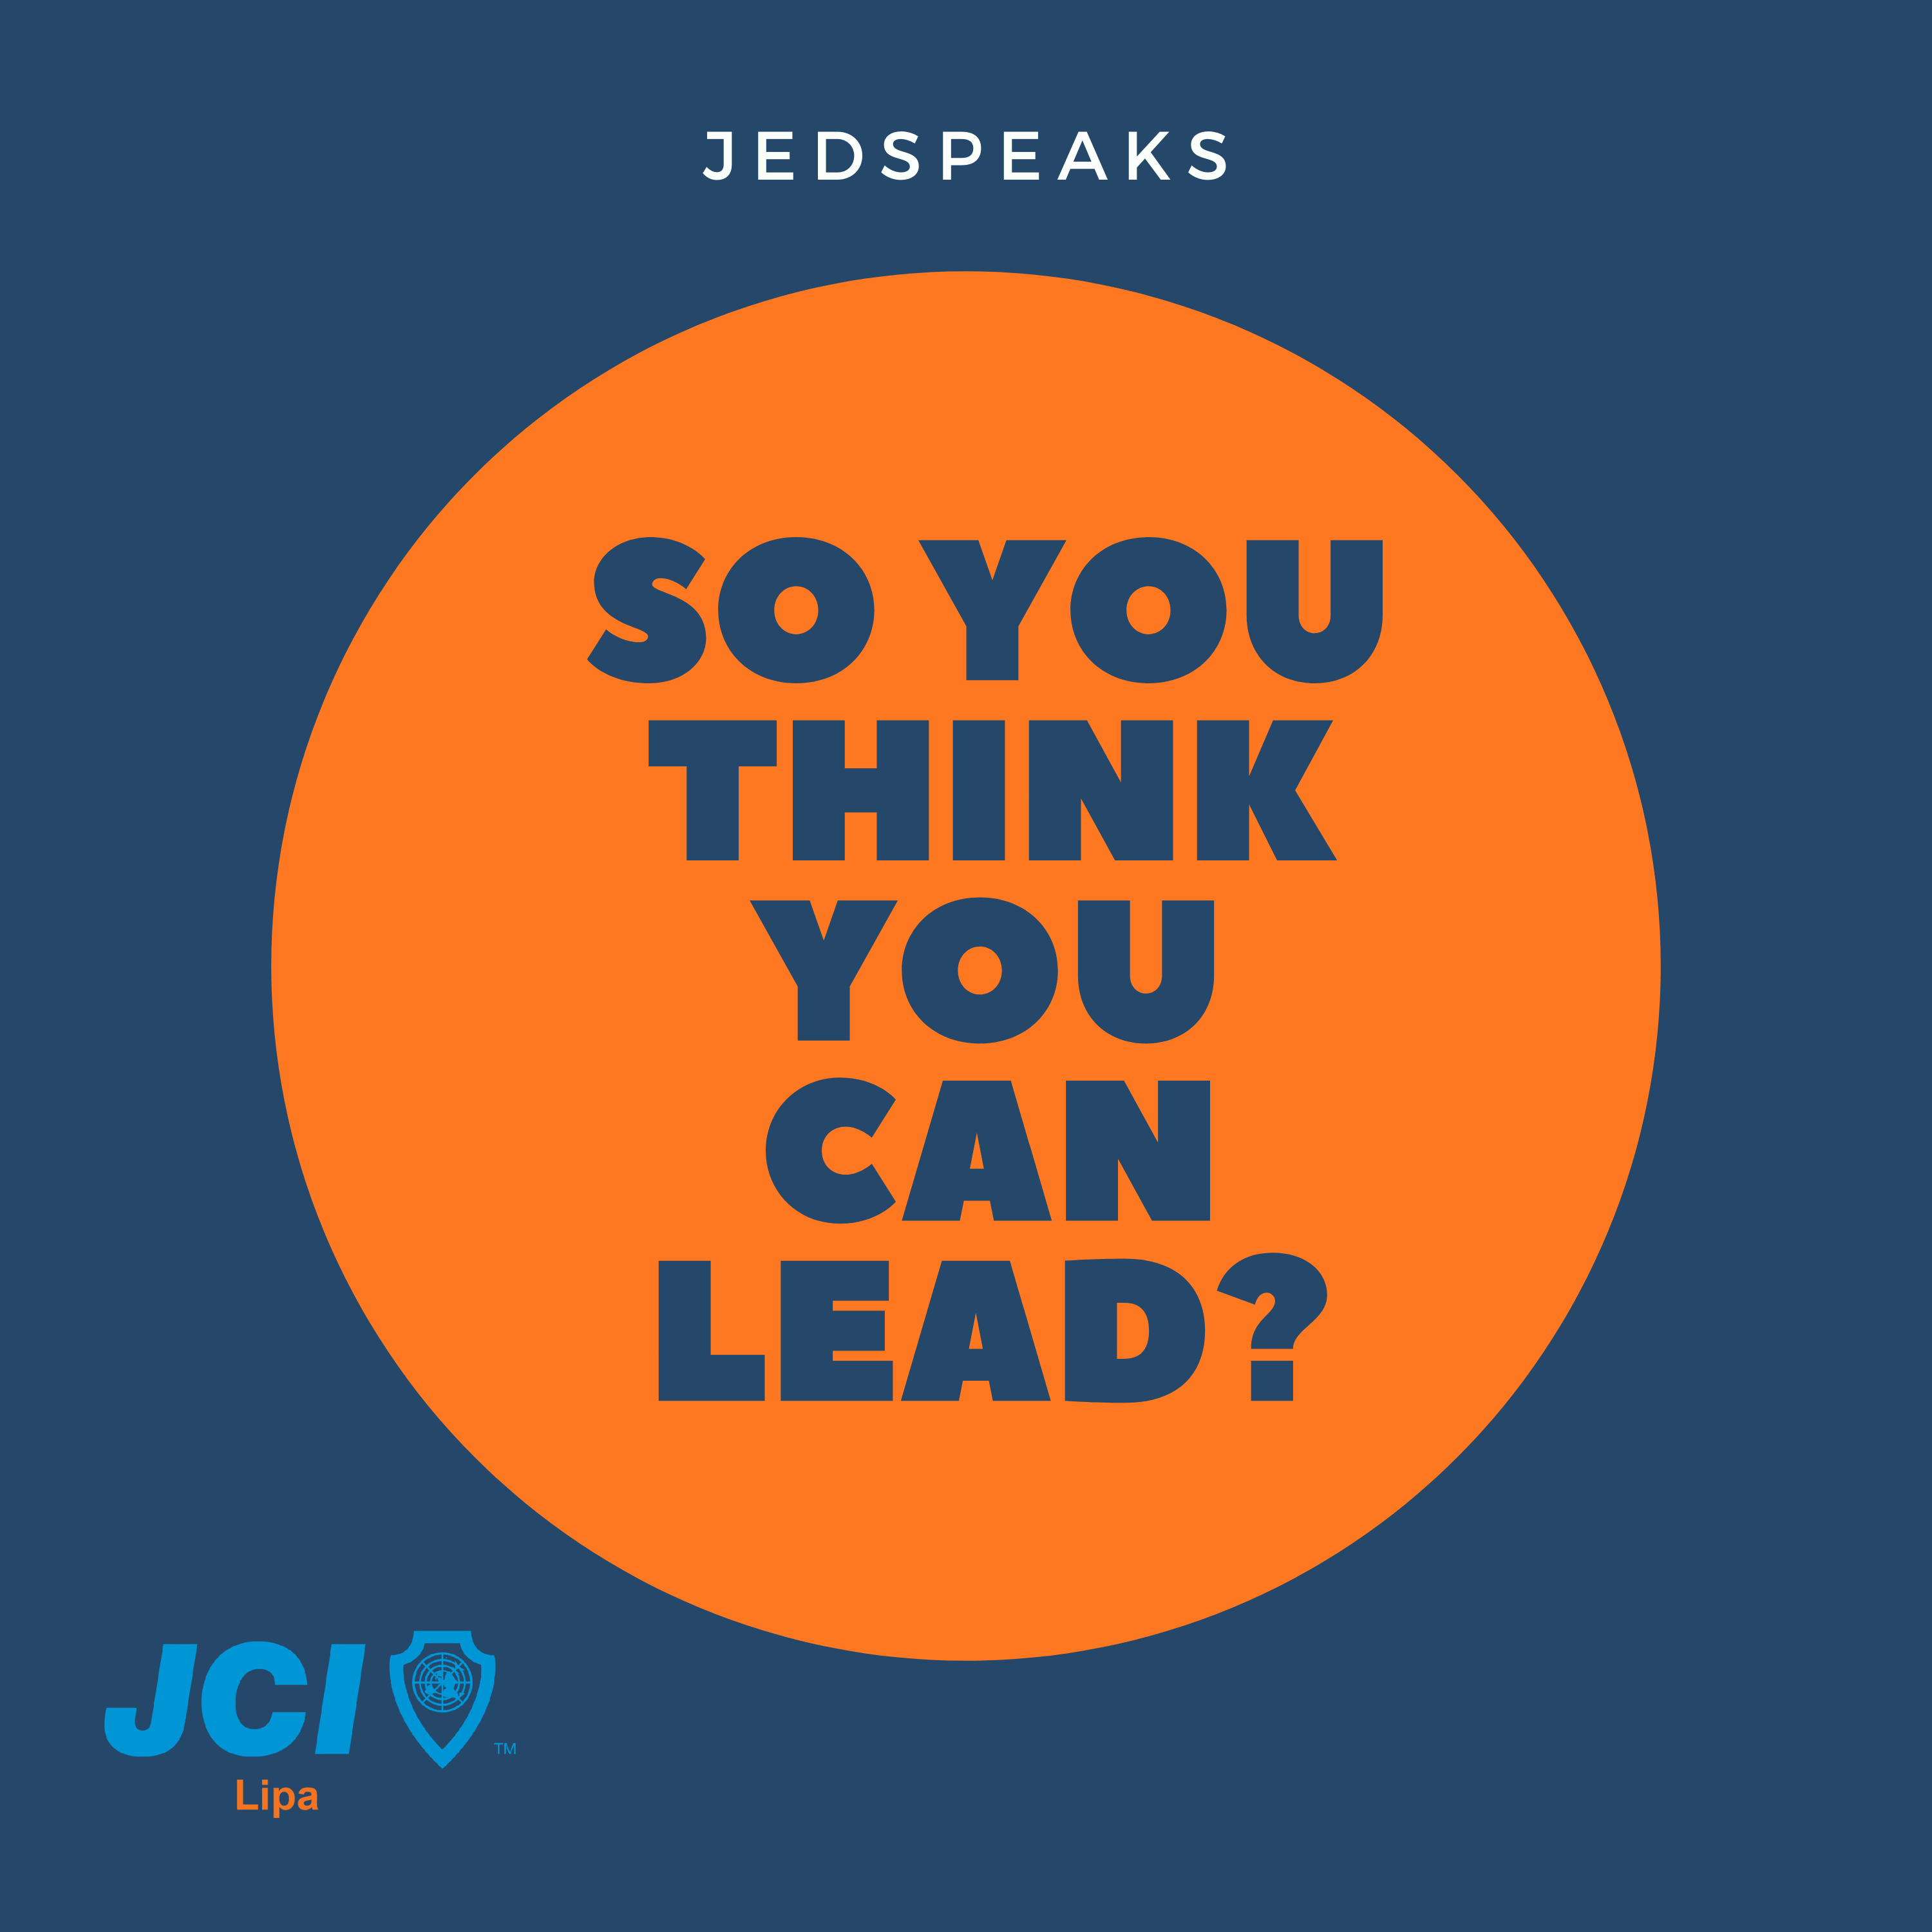 So You Think You Can Lead?